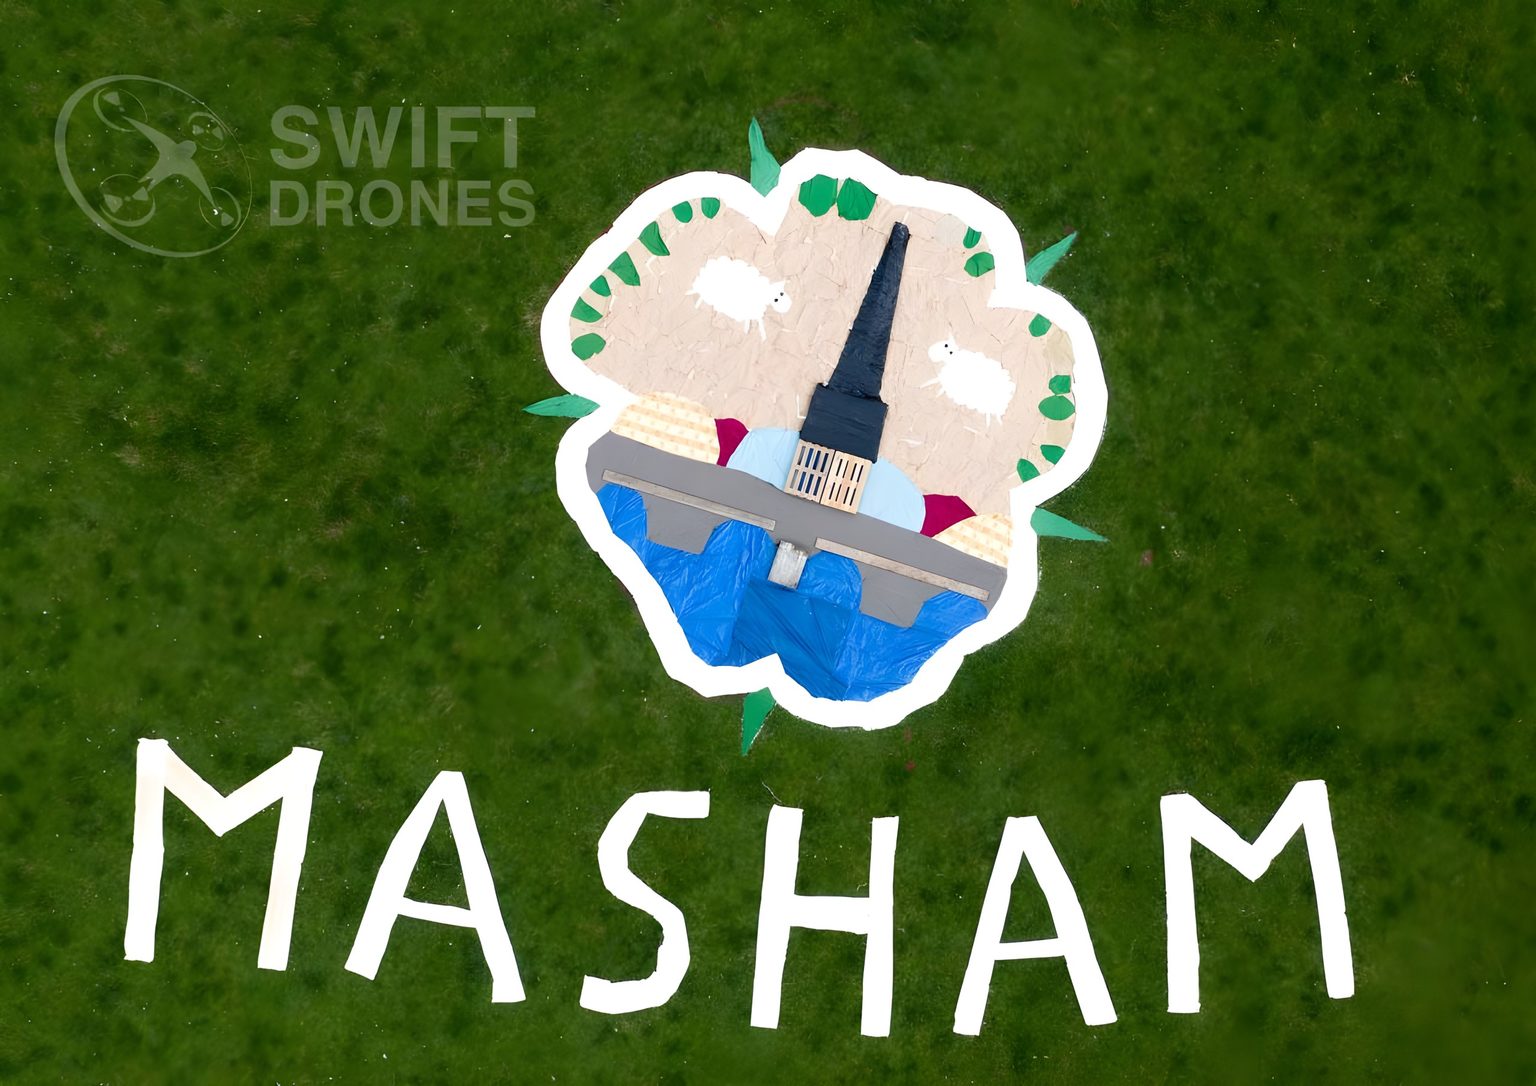 Aerial photo of land art on a field depicting sheep and the town of Masham